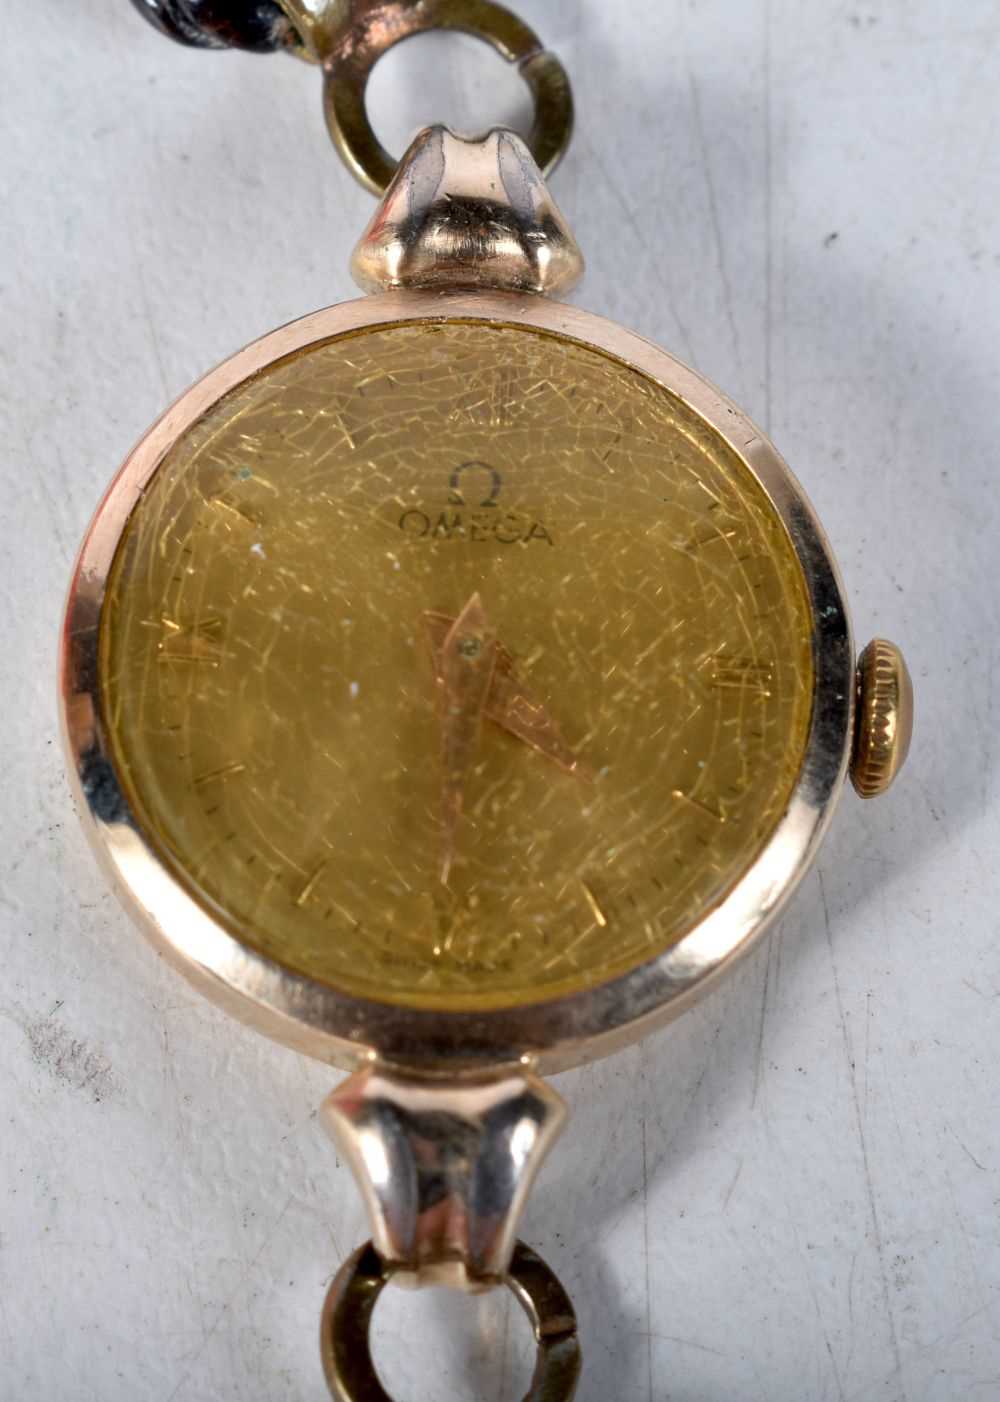 OMEGA Gold Plated Ladies Vintage WRISTWATCH.  Movement - Hand-wind.  WORKING - Tested For Time.